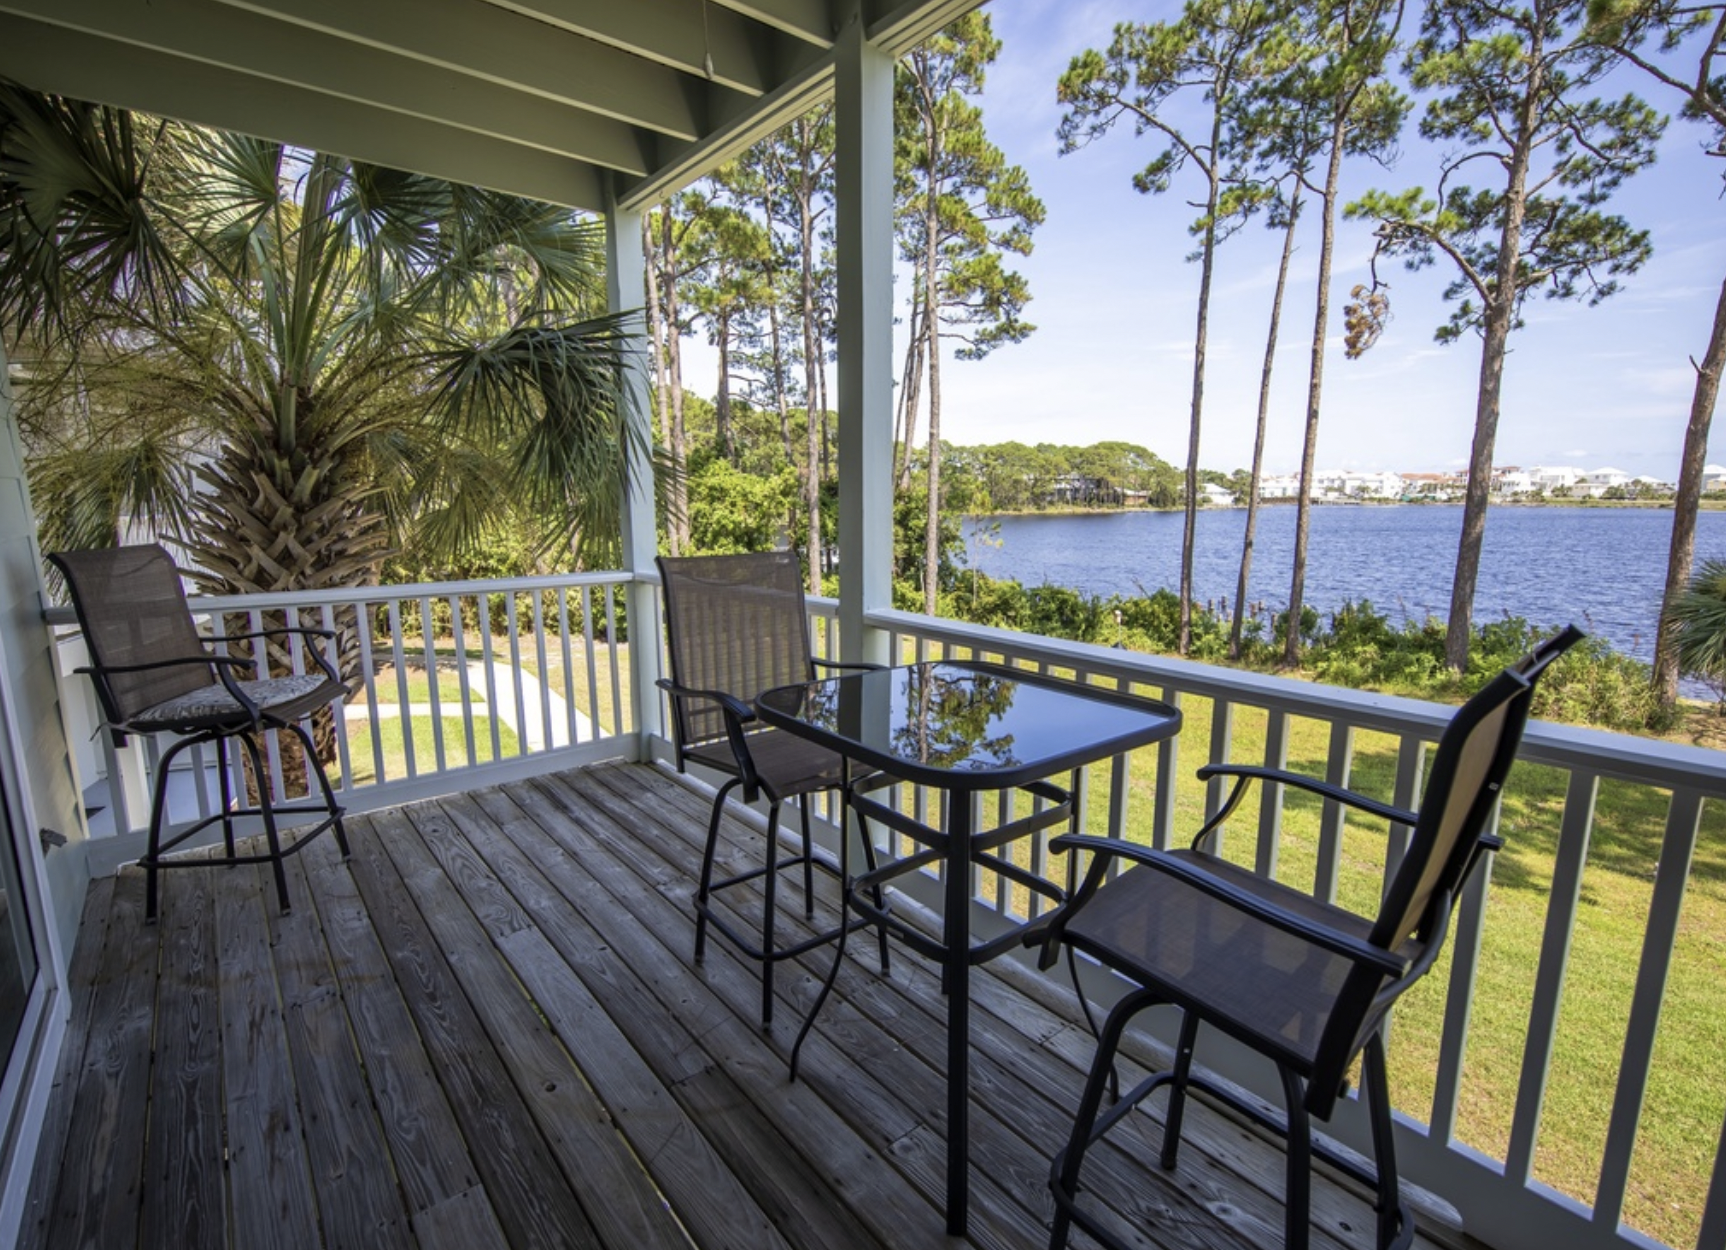 Deck of Salty Eagle Overlook with view of Oyster Lake on 30A